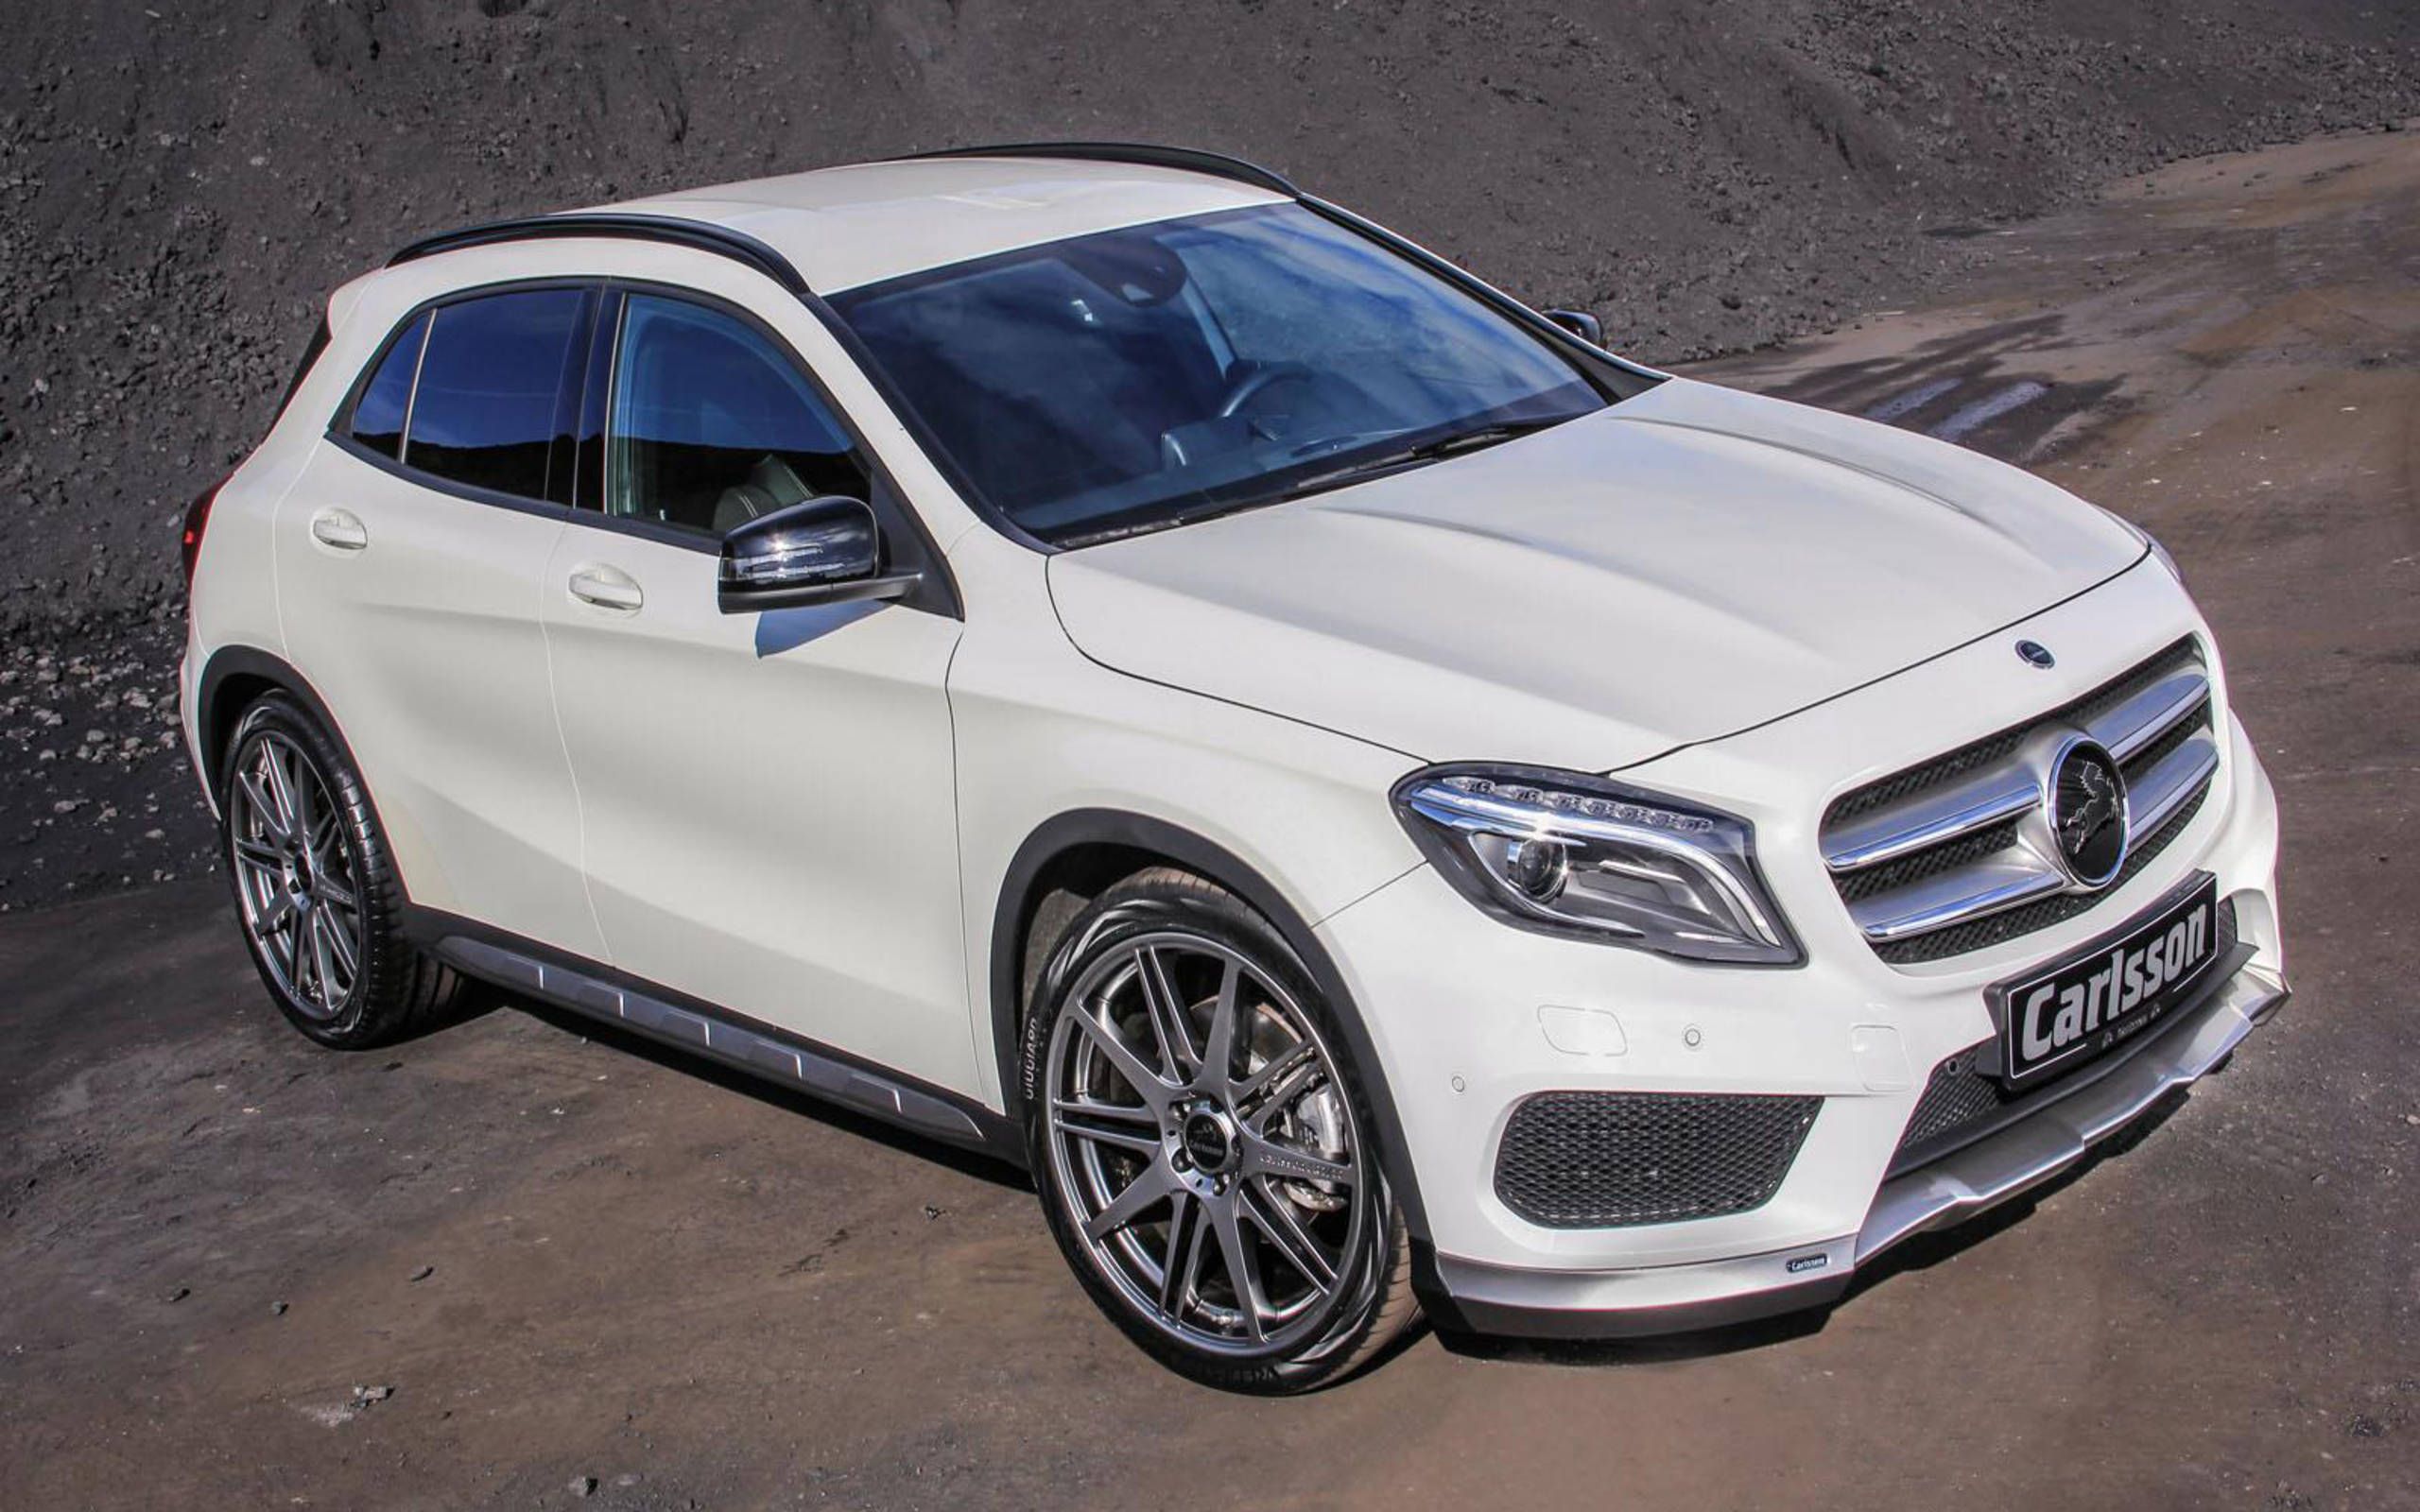 Mercedes-Benz GLA-class gets upgraded by Carlsson